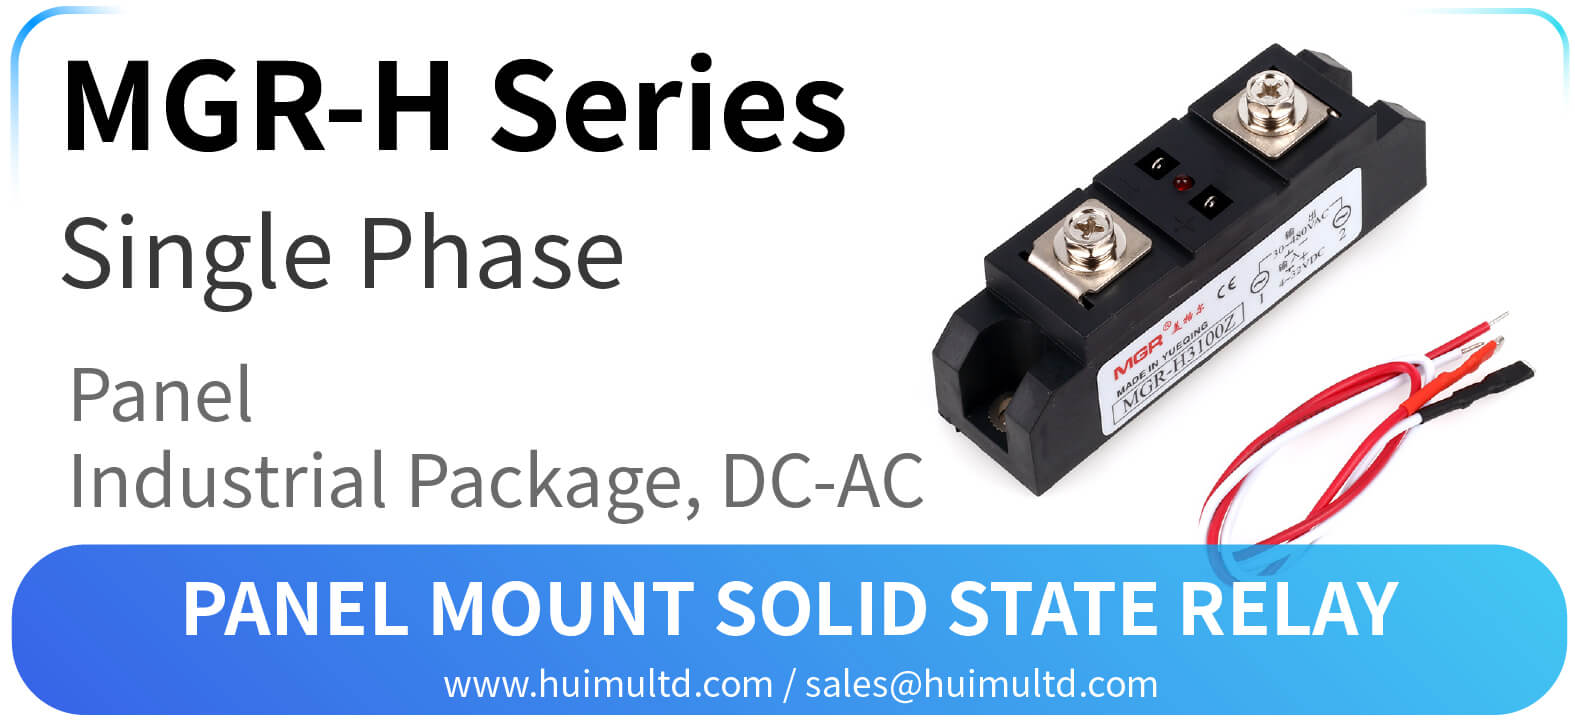 MGR-H Series Panel Mount Solid State Relay